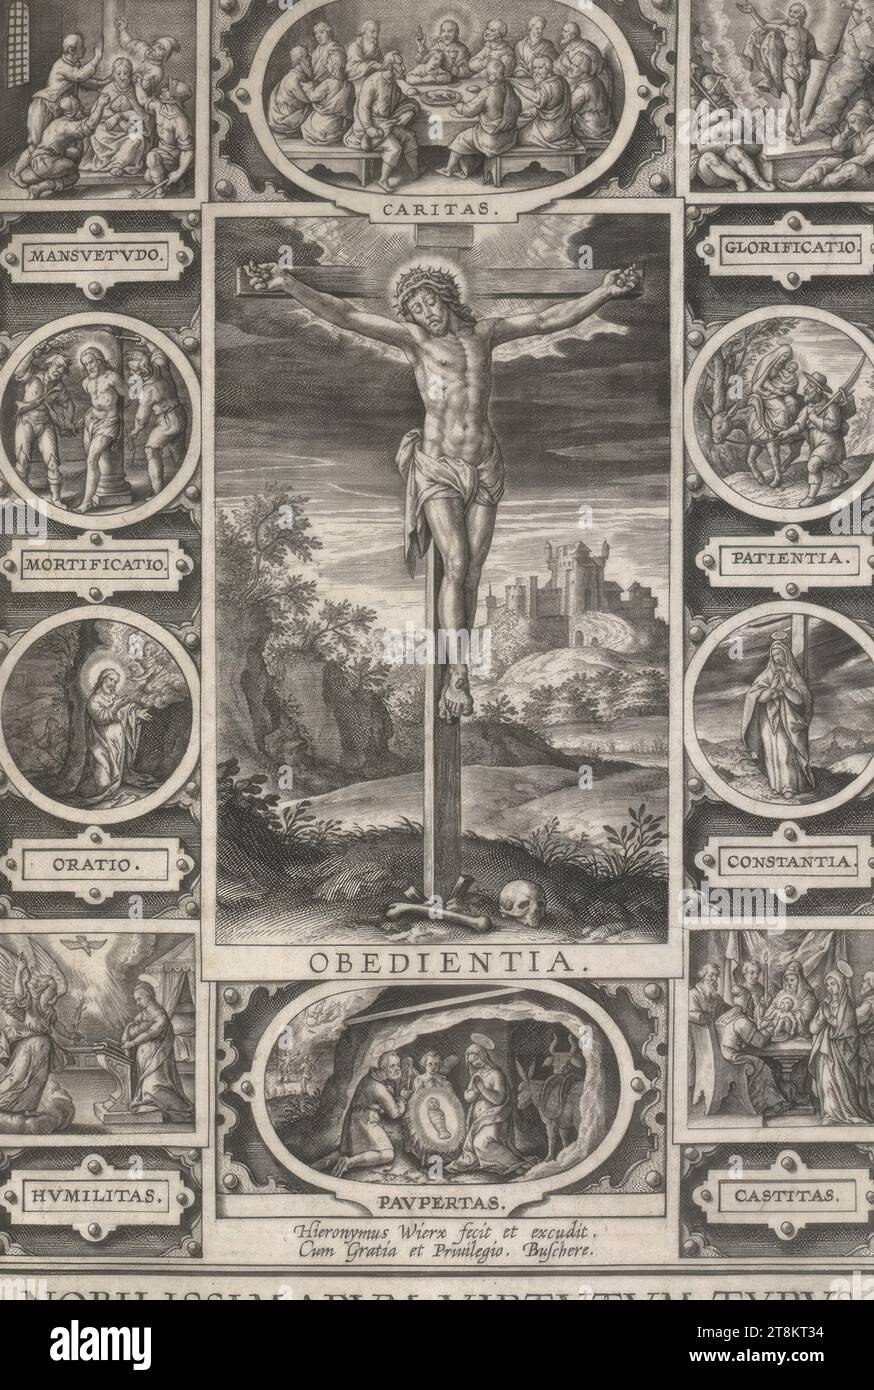 Example of the noblest virtues, Hieronymus Wierix, Antwerp 1553 - 1619 Antwerp, print, copperplate engraving, sheet: 16.1 x 10.9 cm Stock Photo